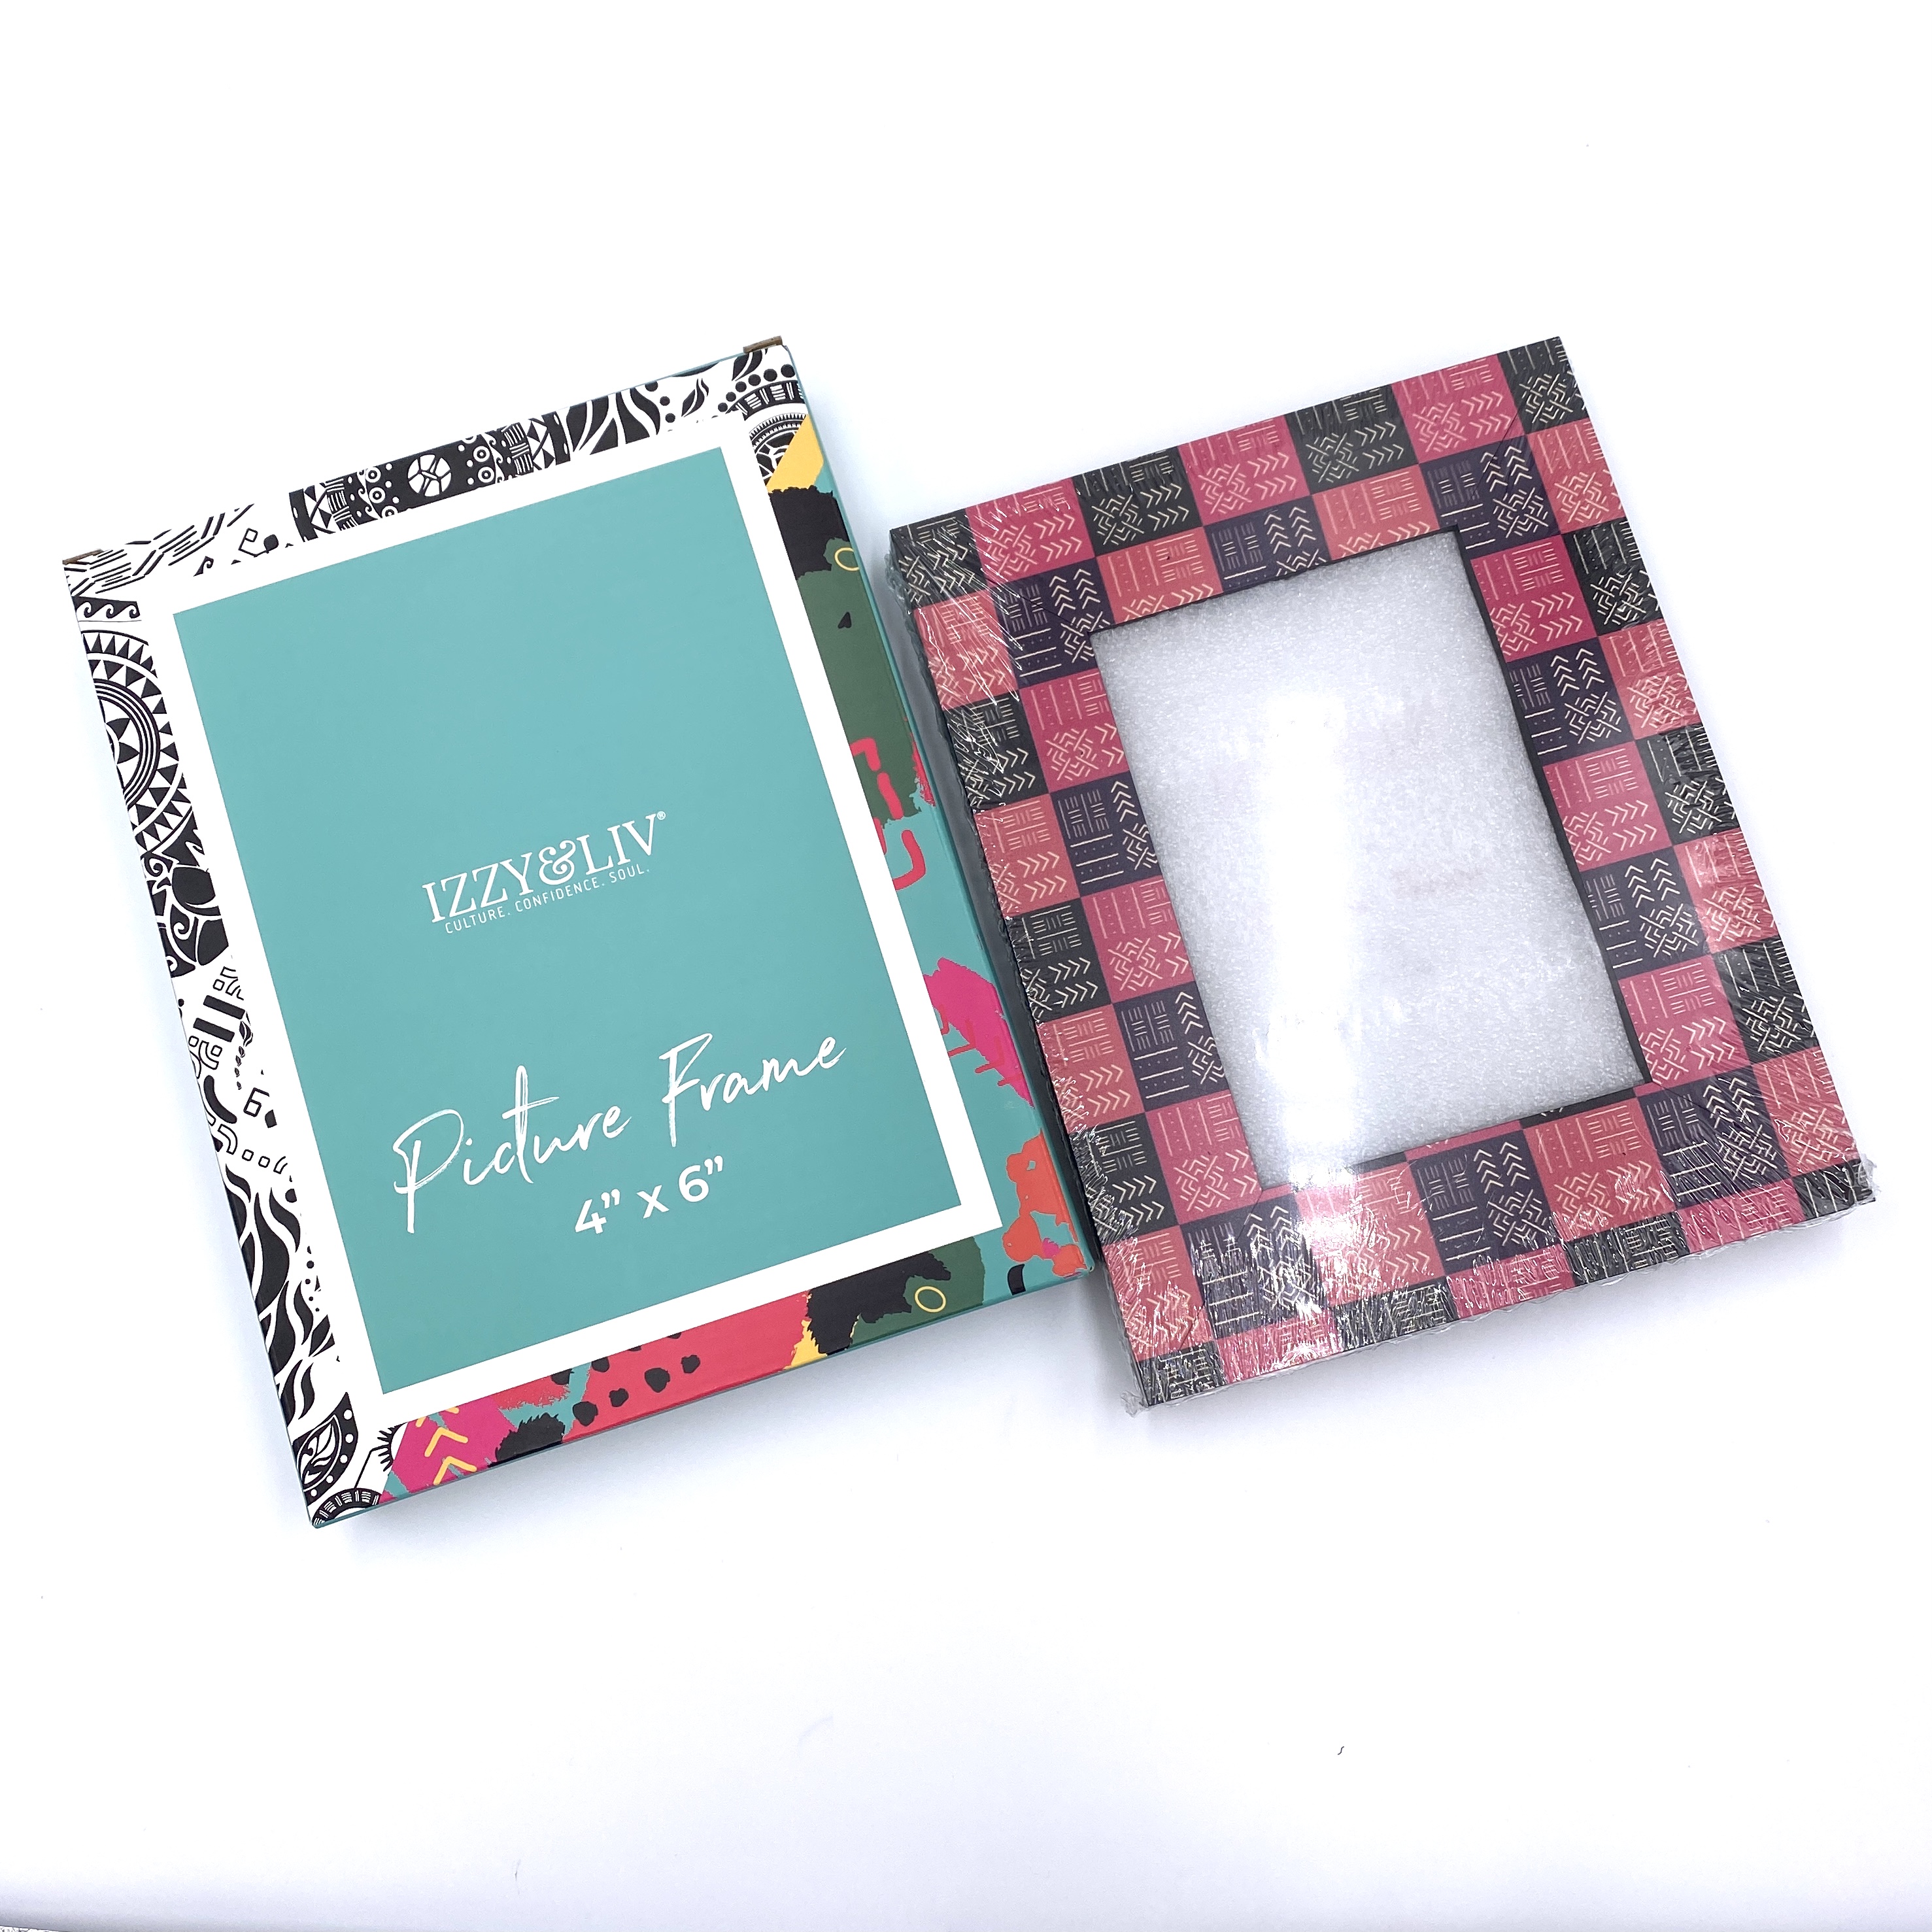 Picture Frame Front for Brown Sugar Box October 2020